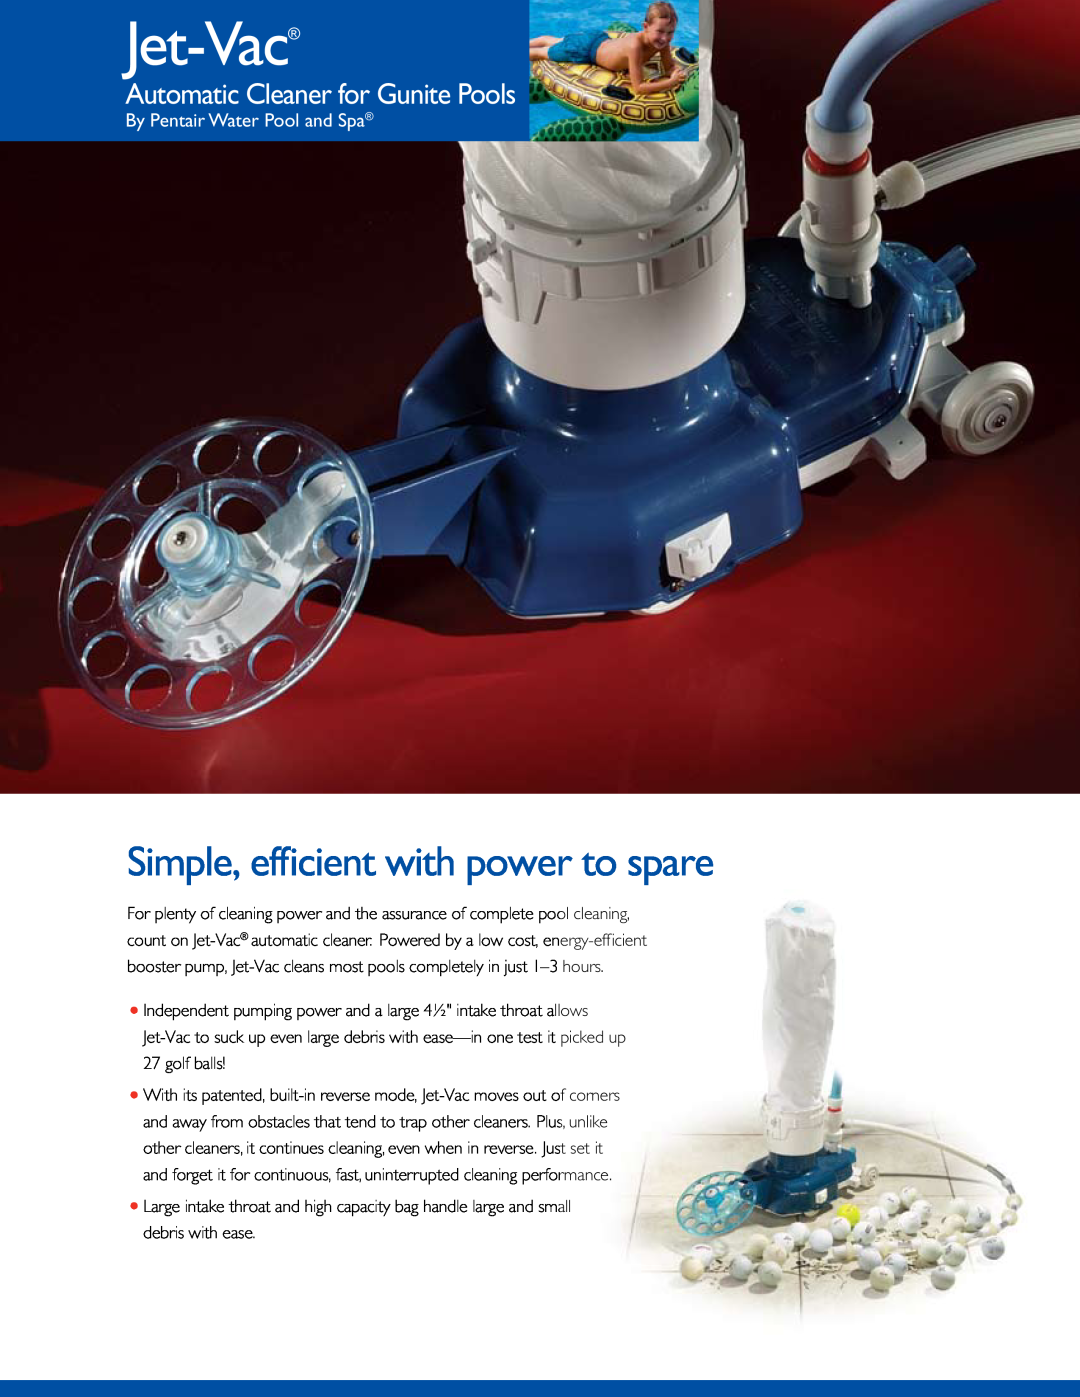 Pentair Jet-Vac manual Simple, efficient with power to spare, Automatic Cleaner for Gunite Pools 